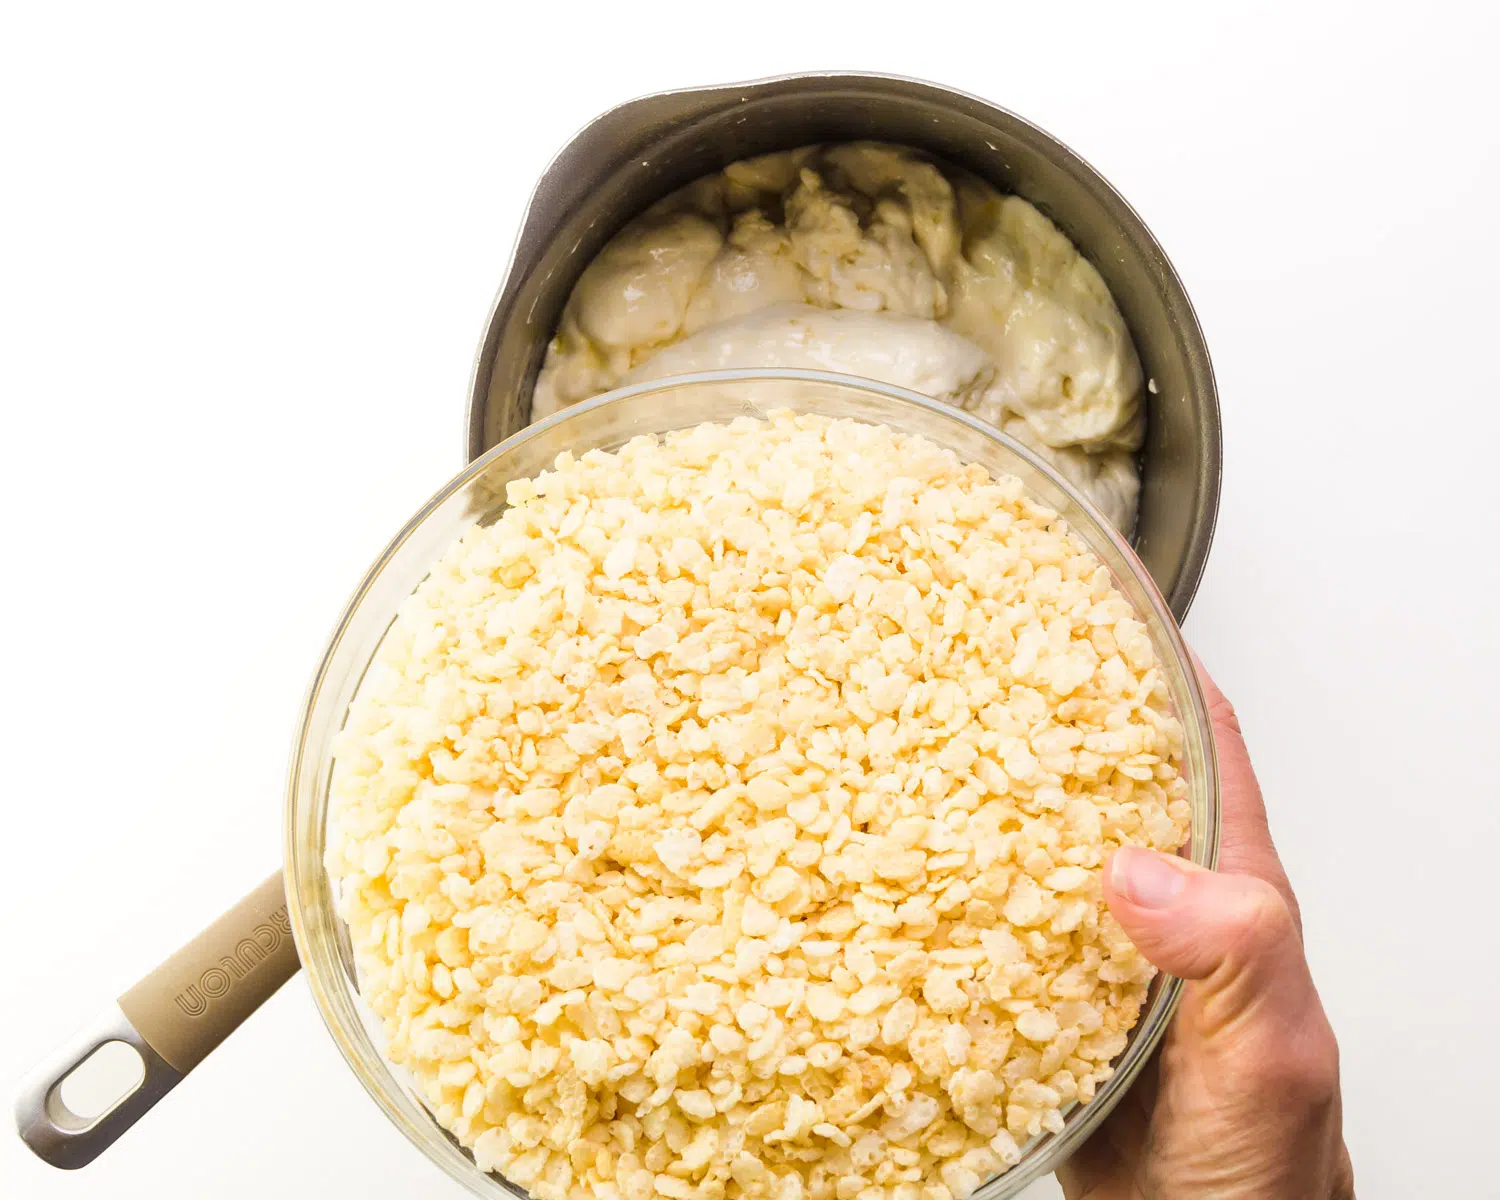 A large bowl of rice crispy cereal is being poured into a saucepan with melted marshmallow mixture.